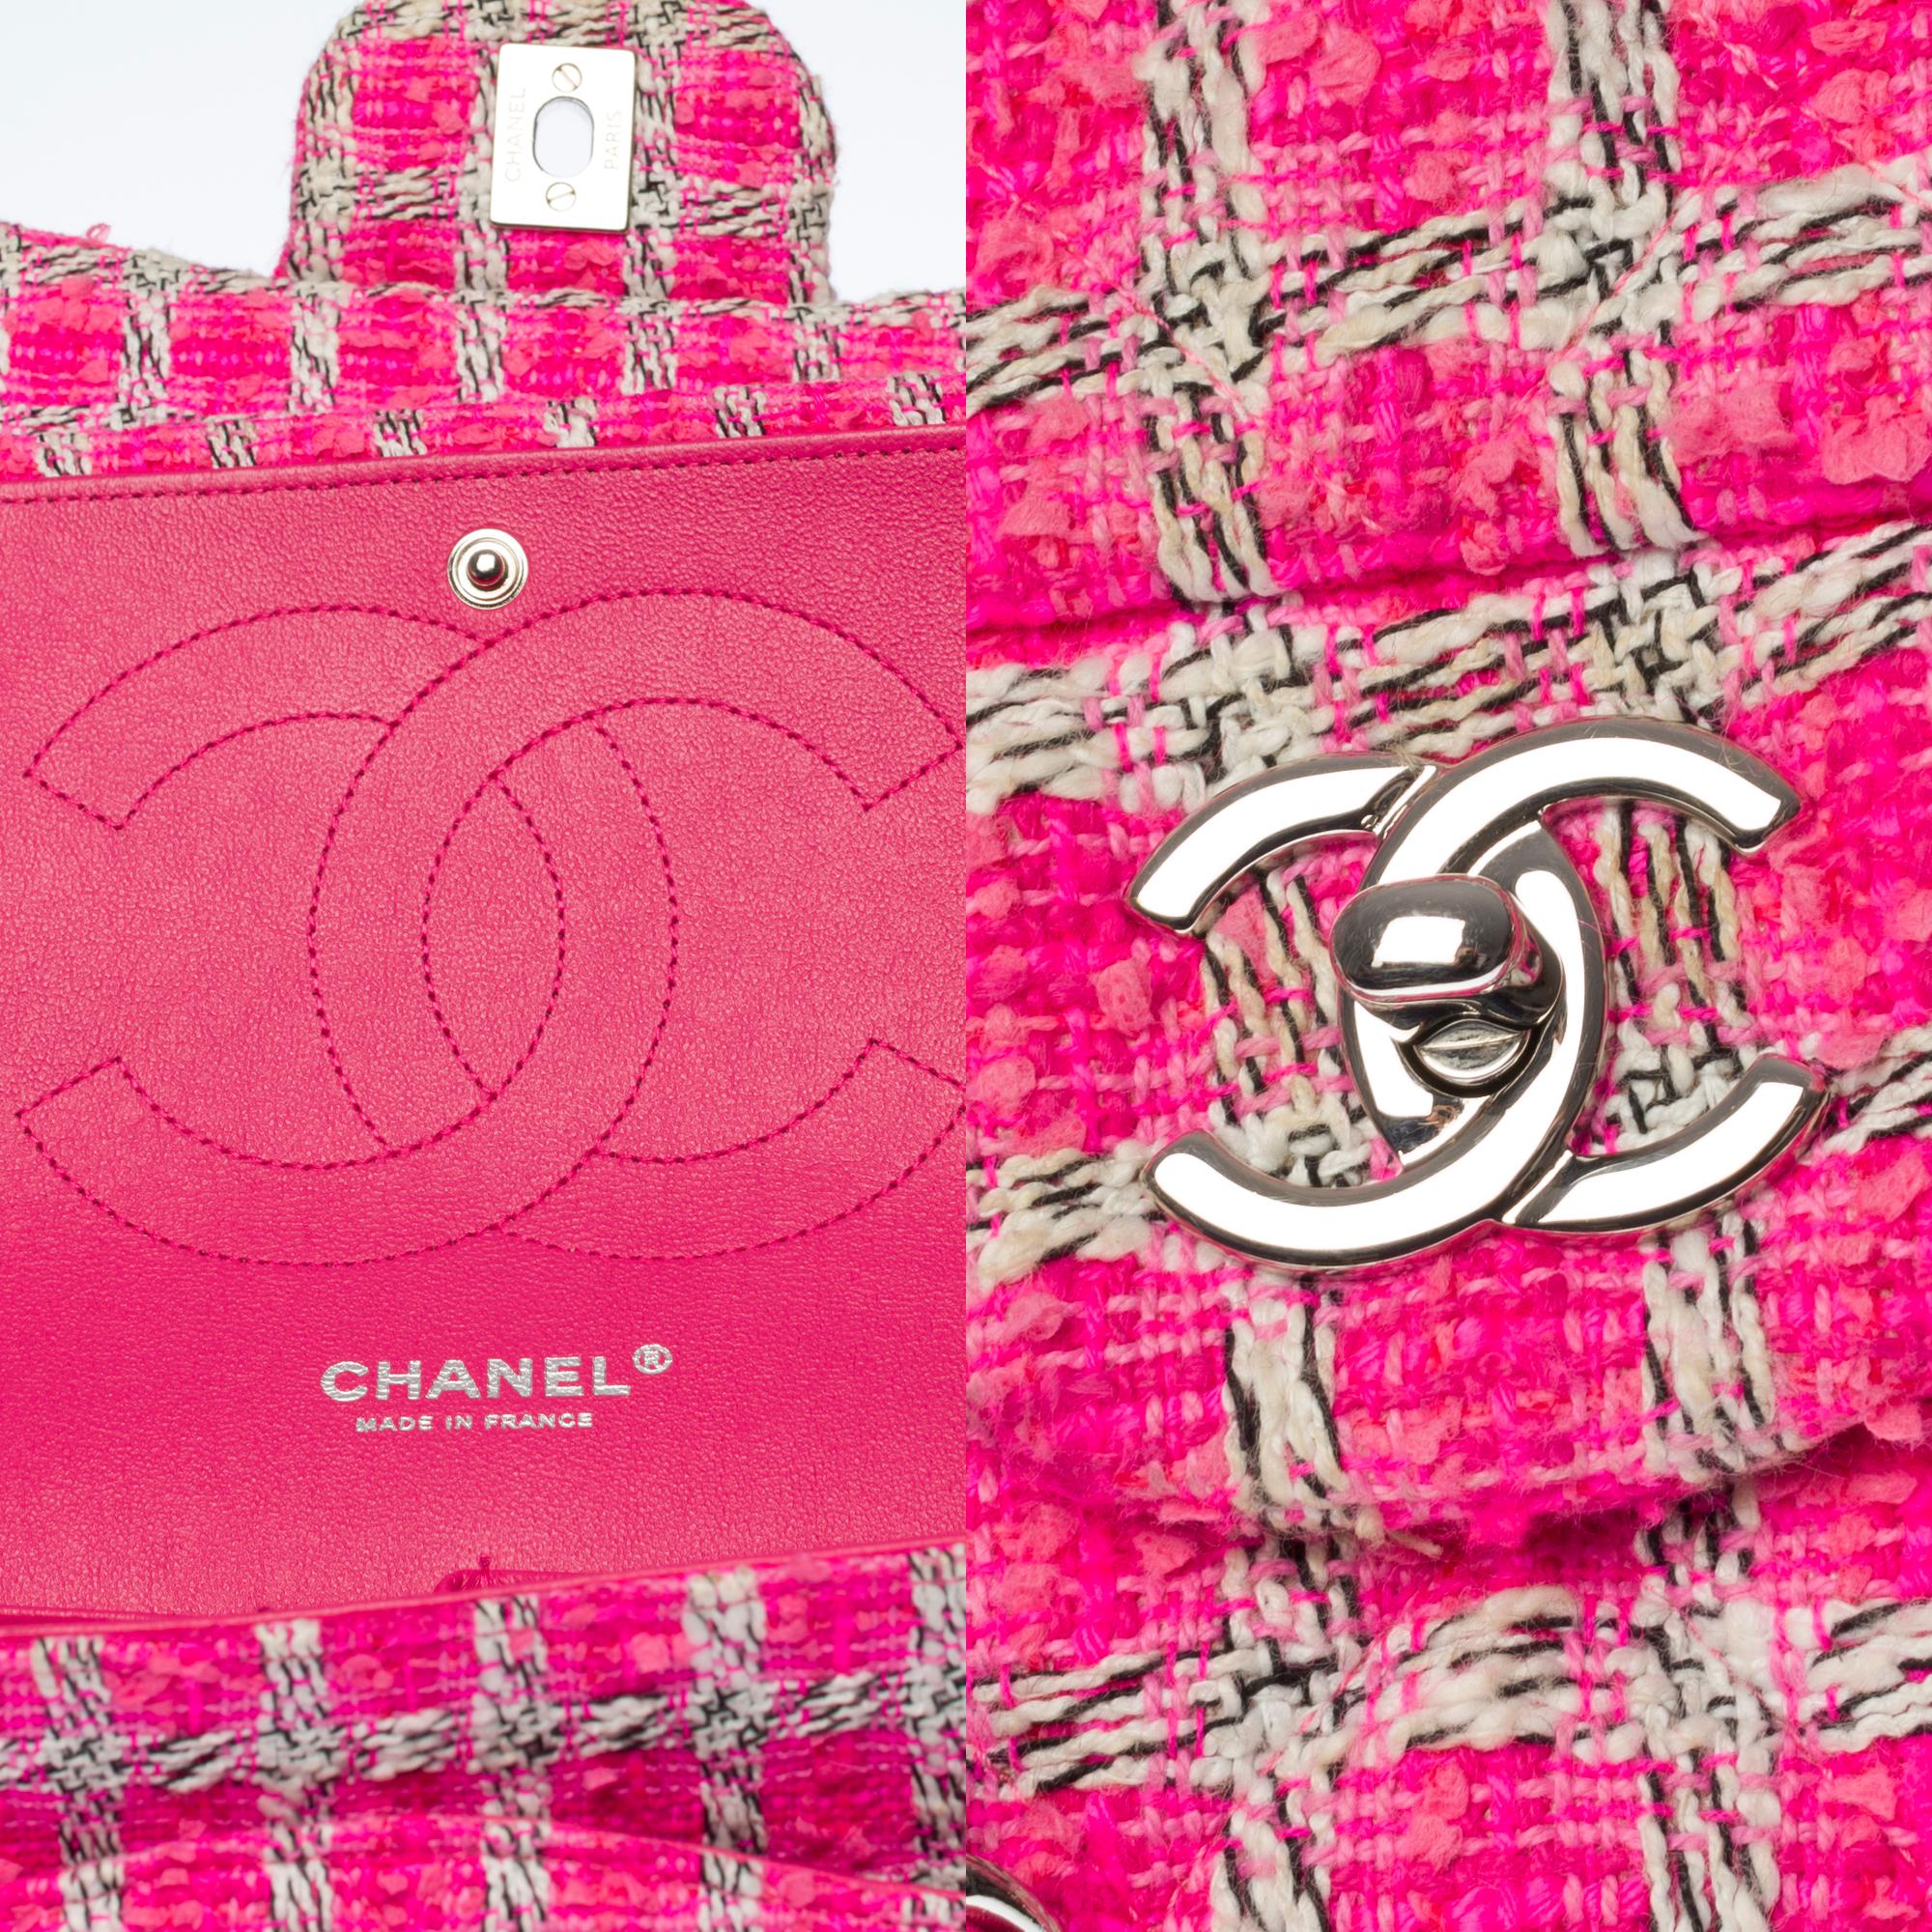 Women's Limited Edition Chanel Timeless Jumbo Shoulder bag in Pink Tweed with SHW